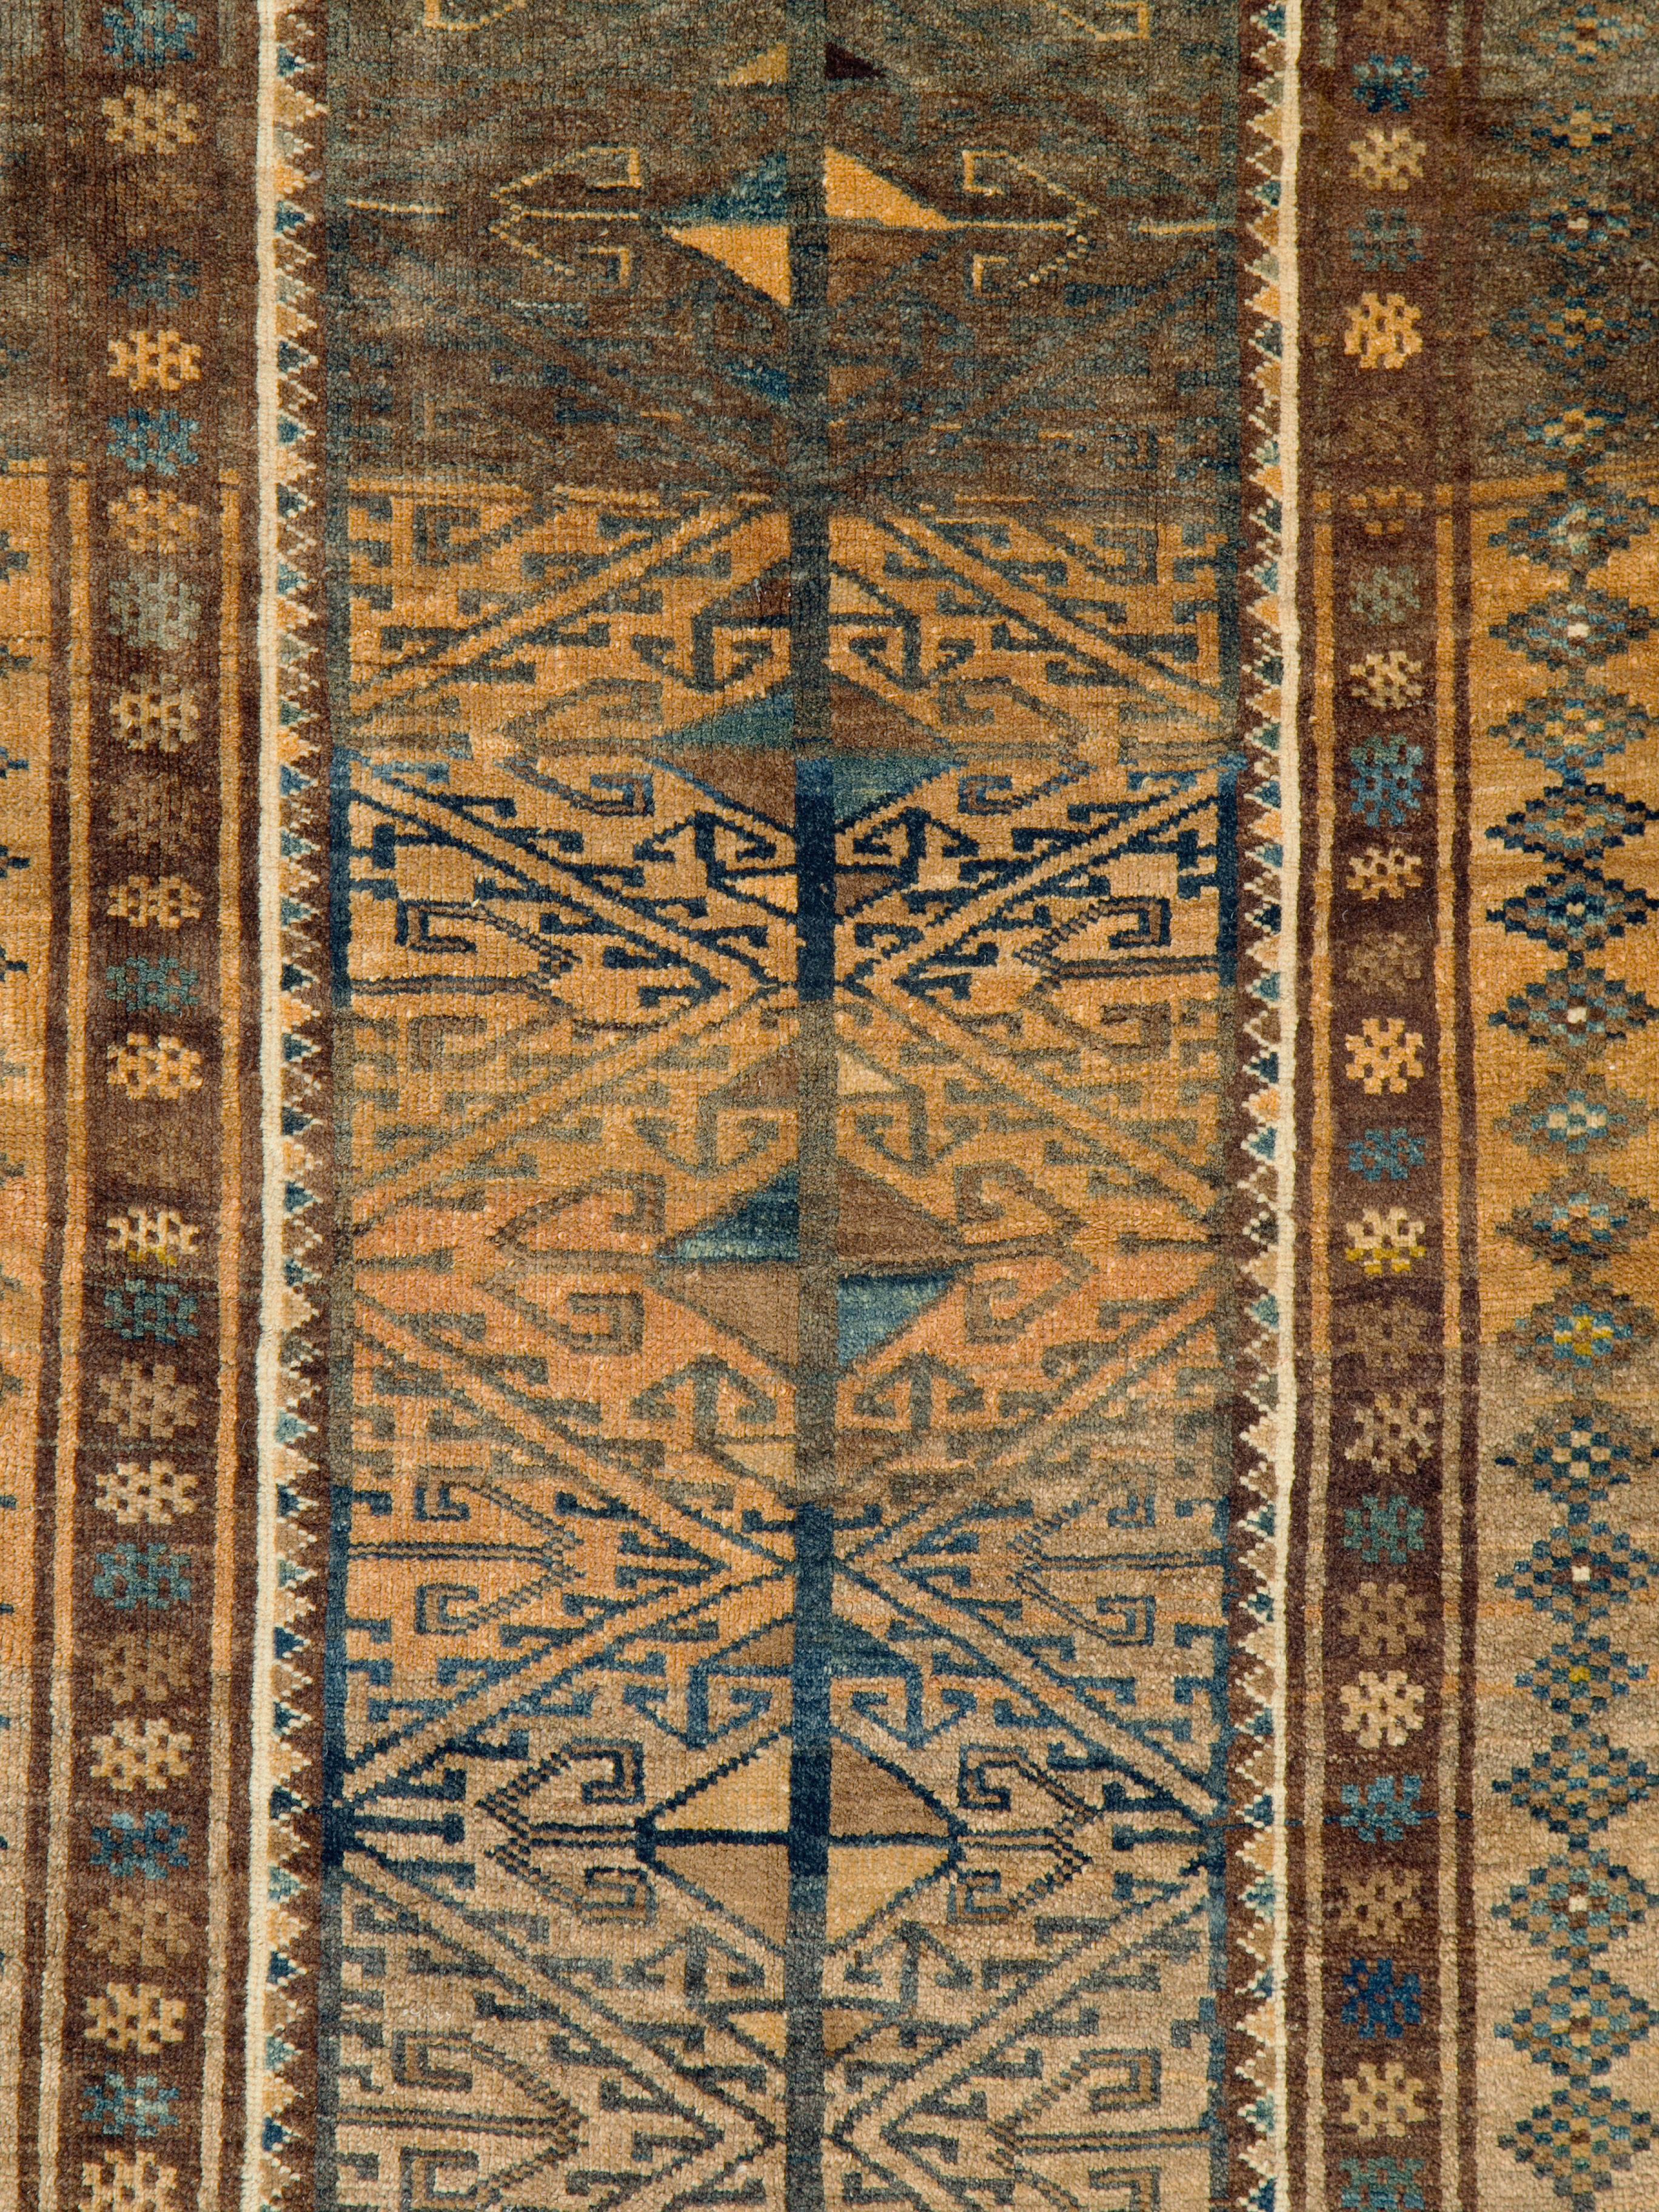 A vintage Persian Baluch rug from the mid-20th century.